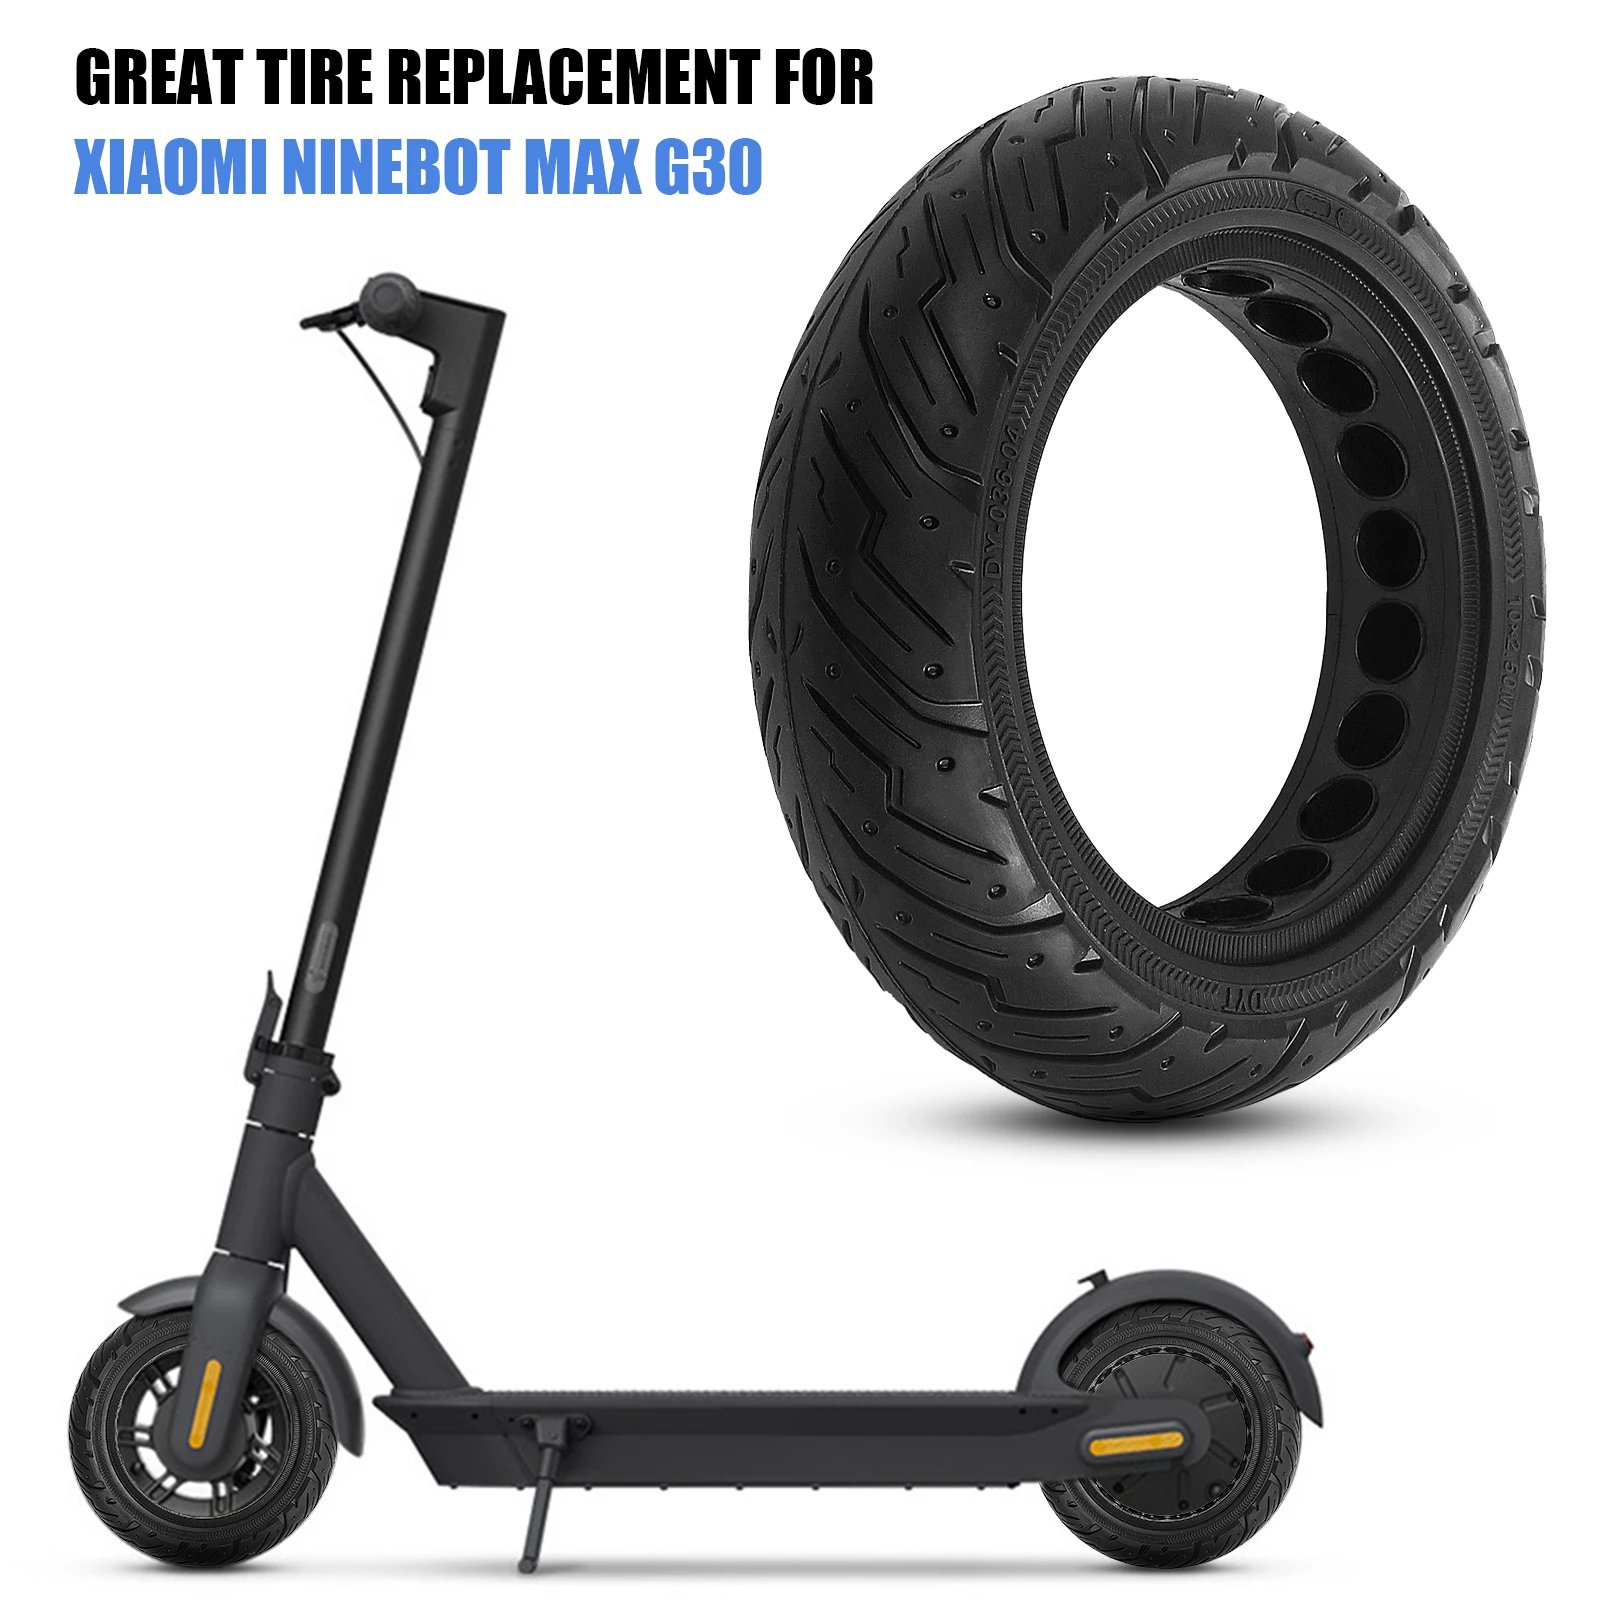 

10 x 2.5m Solid Tire High Intensity Rubber Tire With Honeycomb Hole Replacement for Xiaomi Ninebot Max G30 Electric Scooter